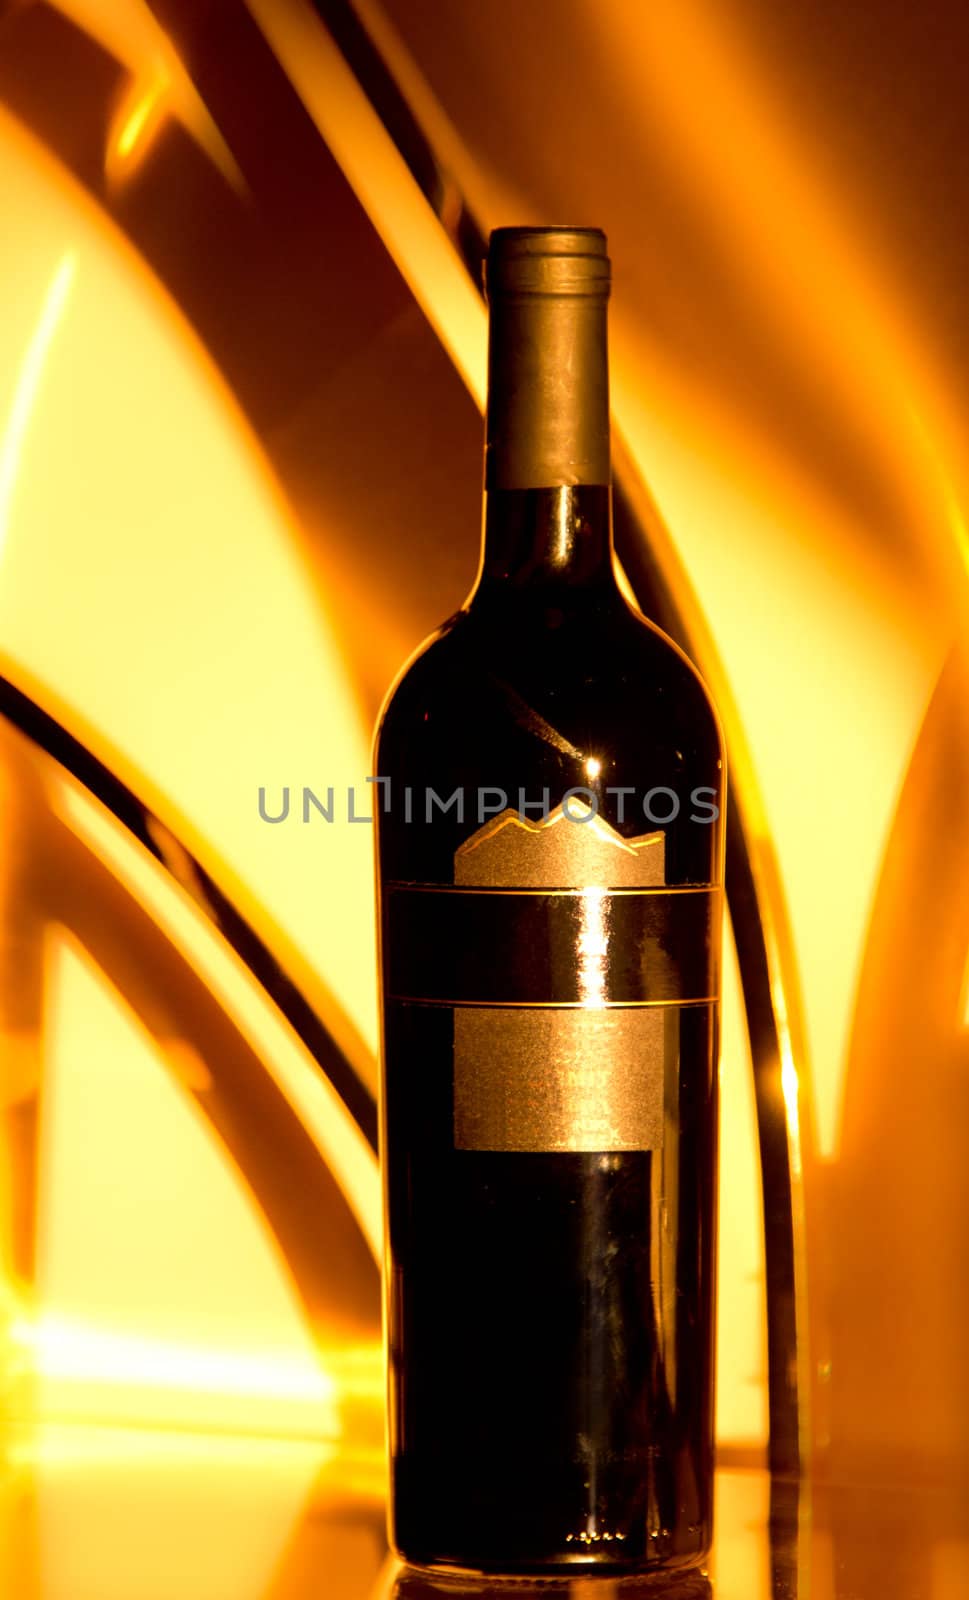 The golden wine bottle by derejeb